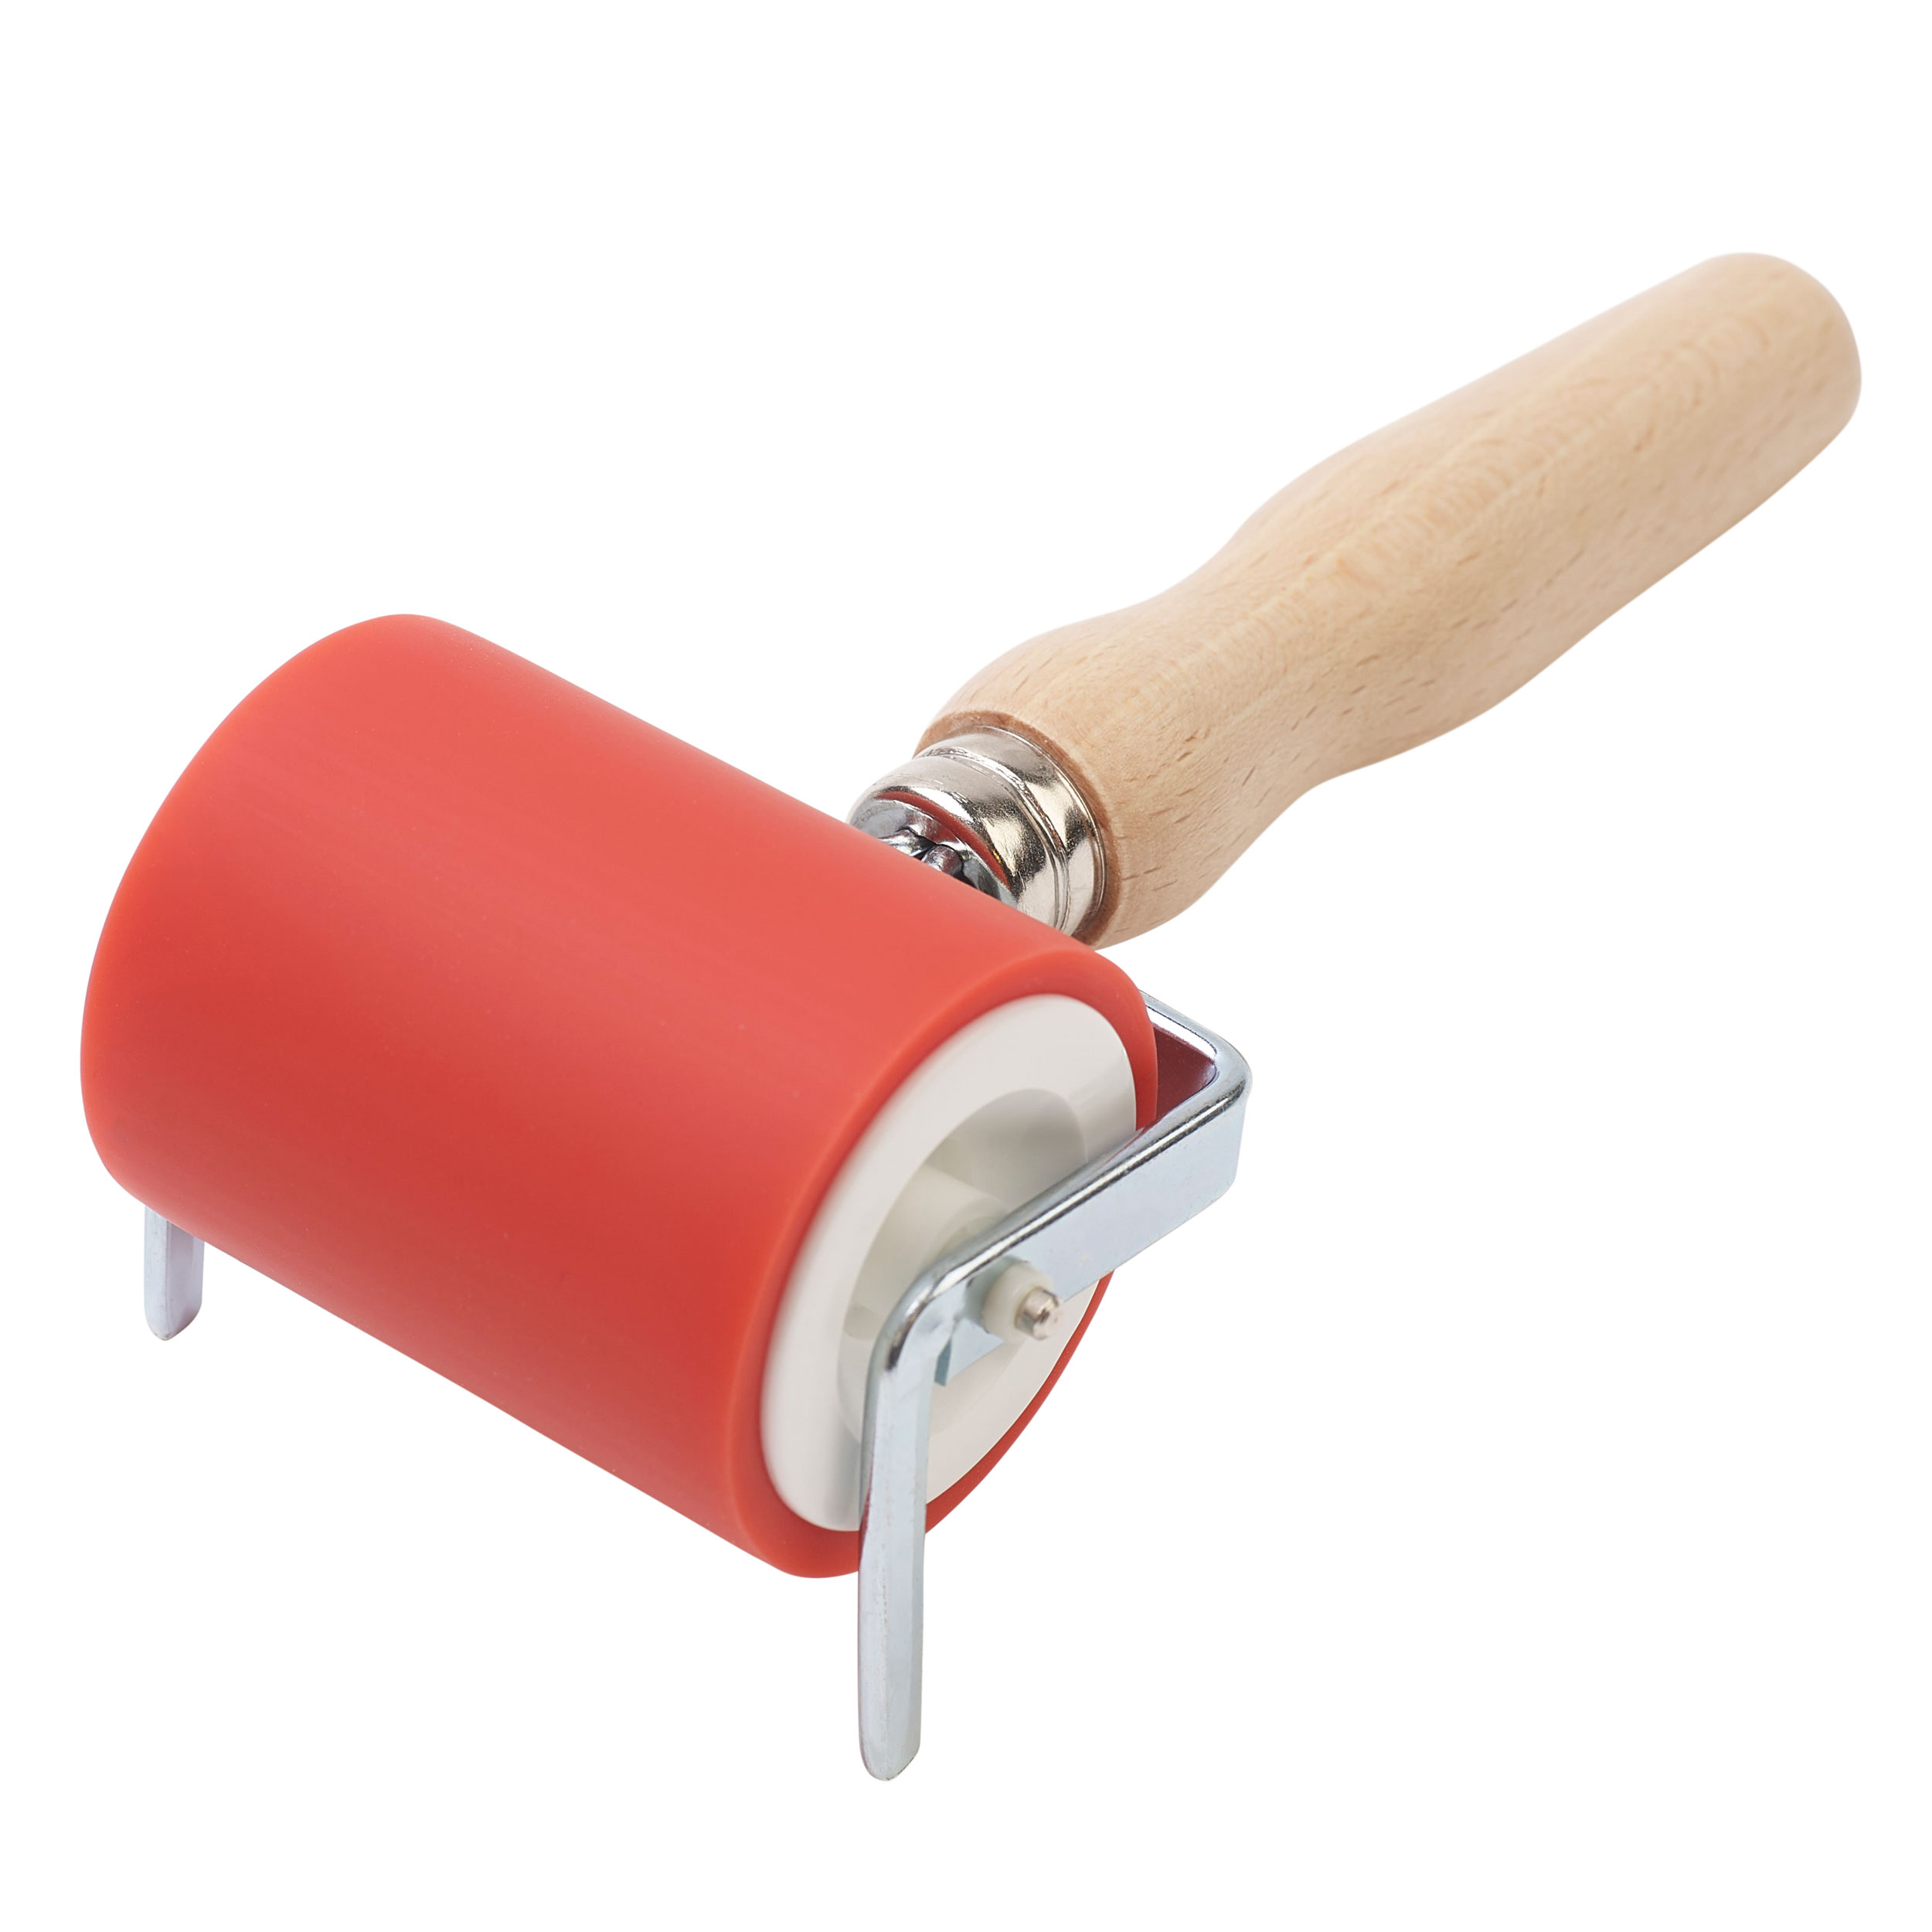 American Educational Products A-131200 ABIG Ink Roller, 11.8 (5 mm=0.2)  Rubber Thickness Aluminum Core and Beechwood Handle